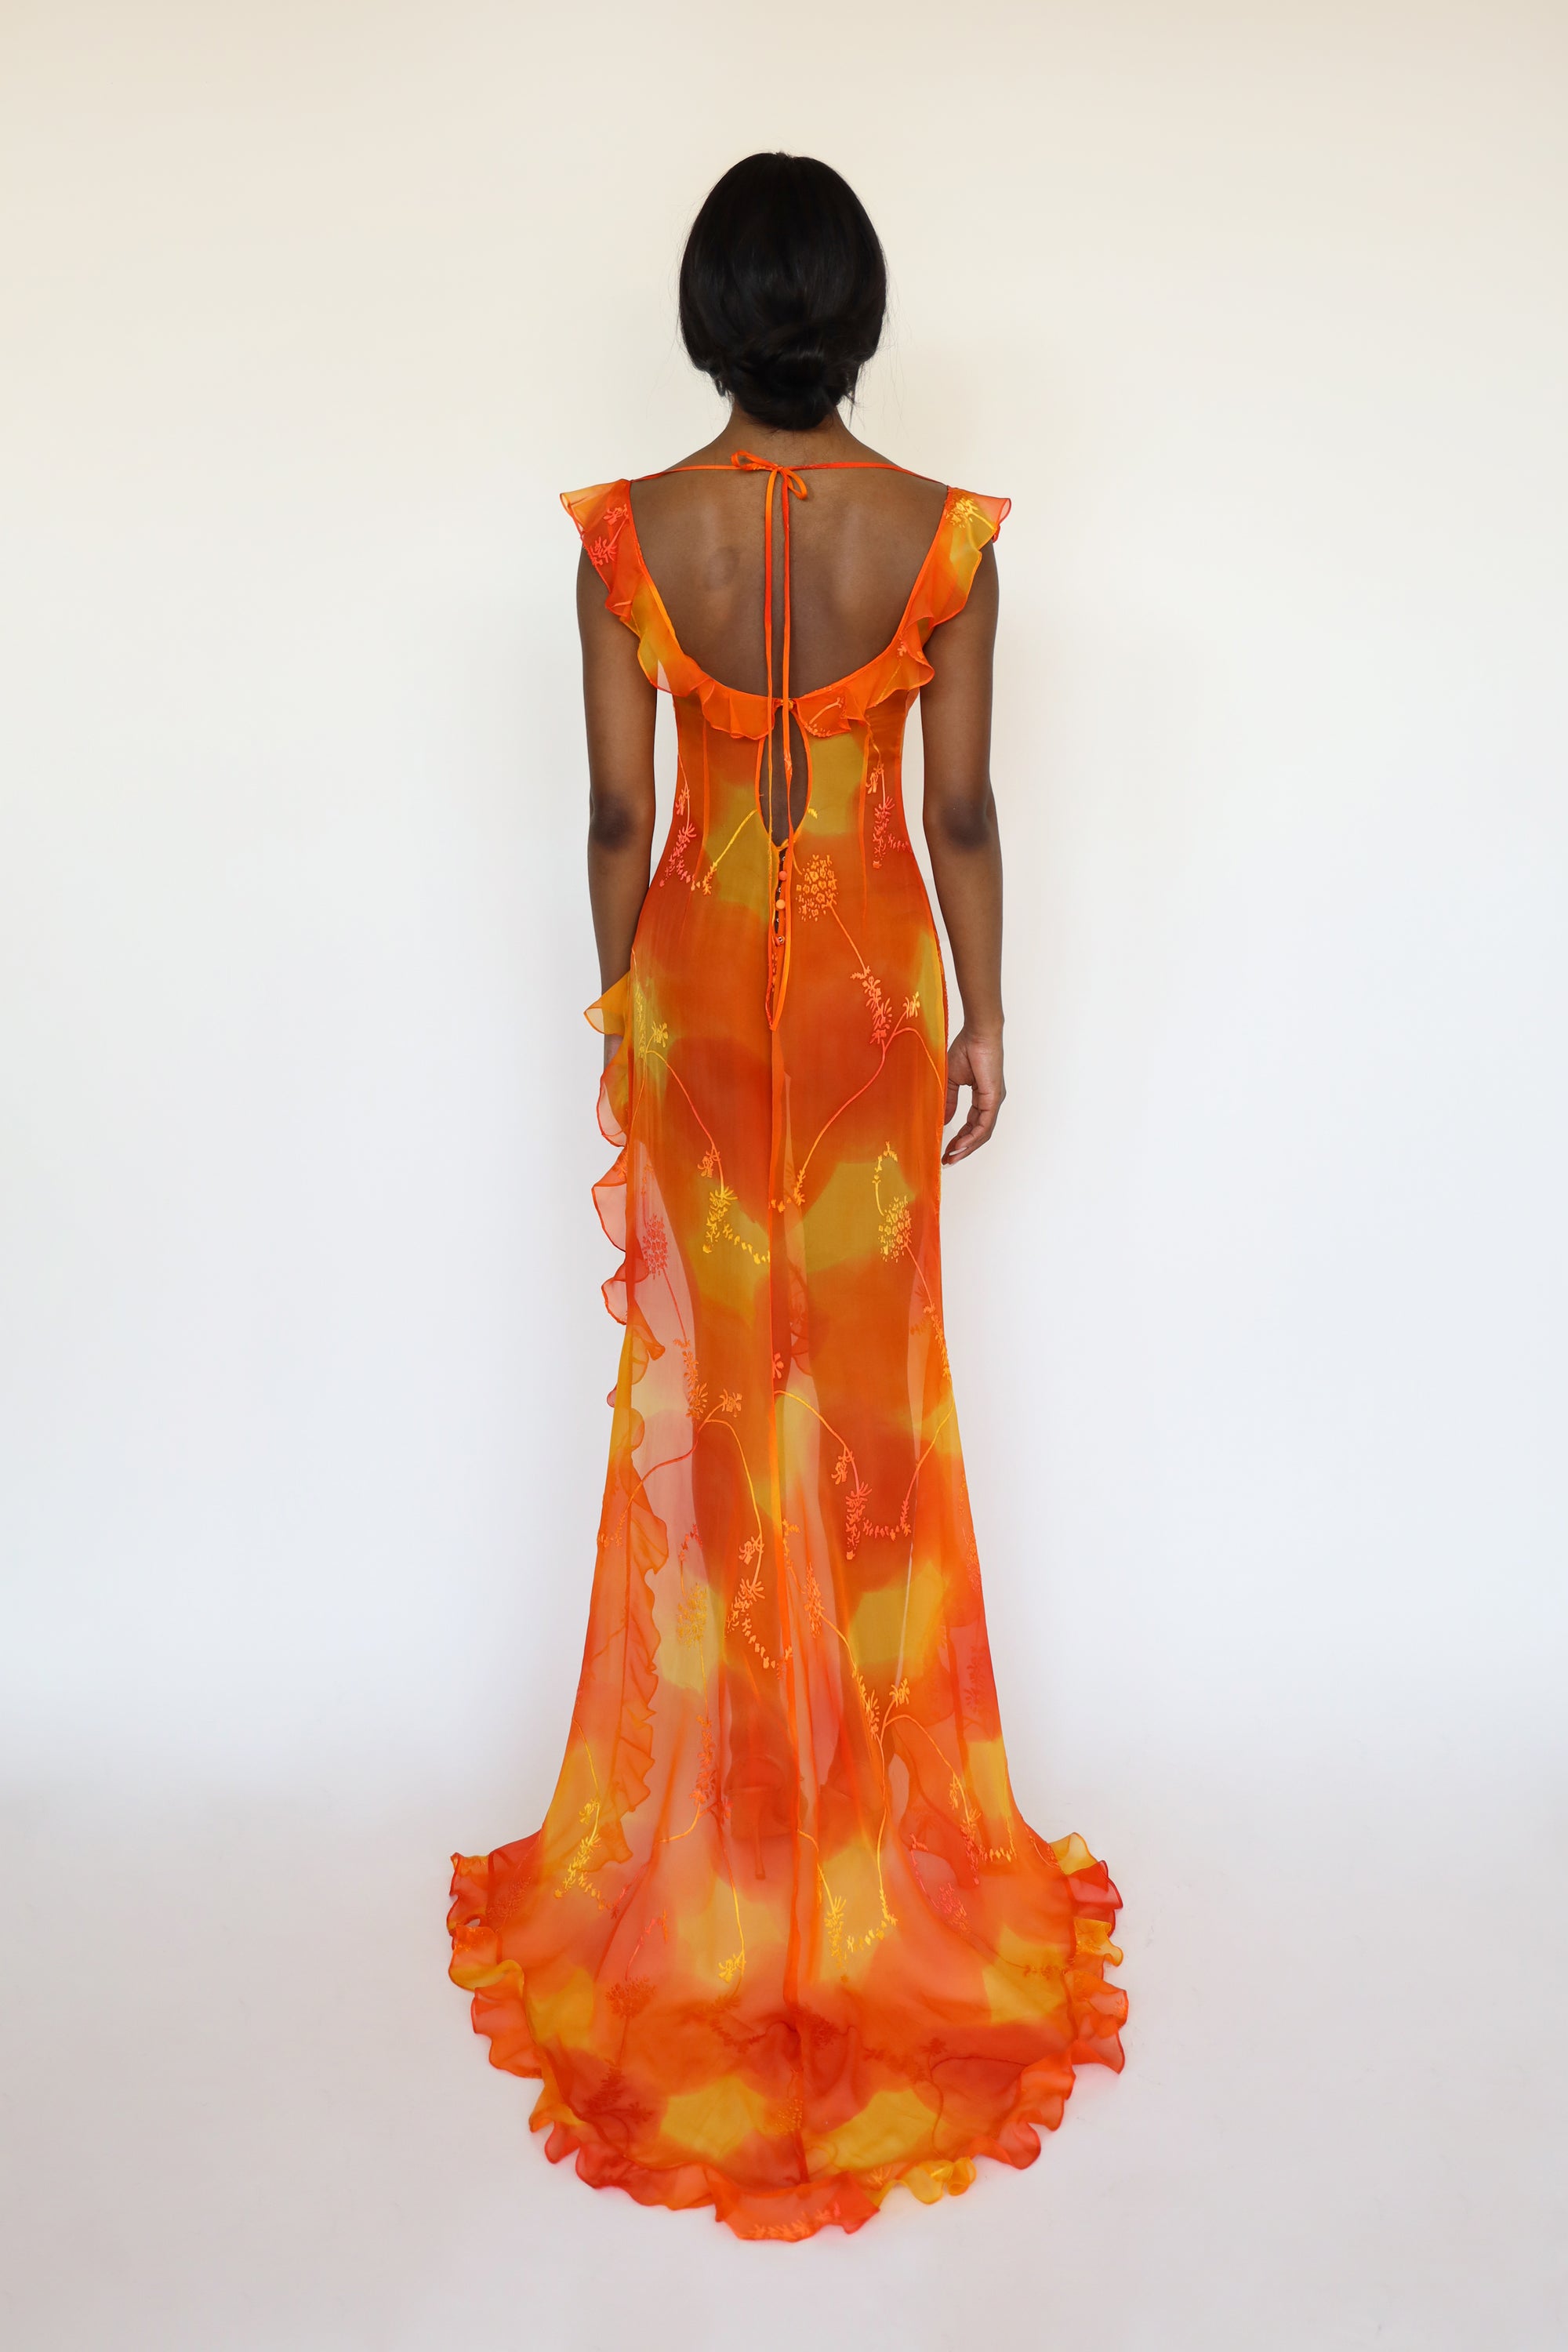 The Sunset Gown